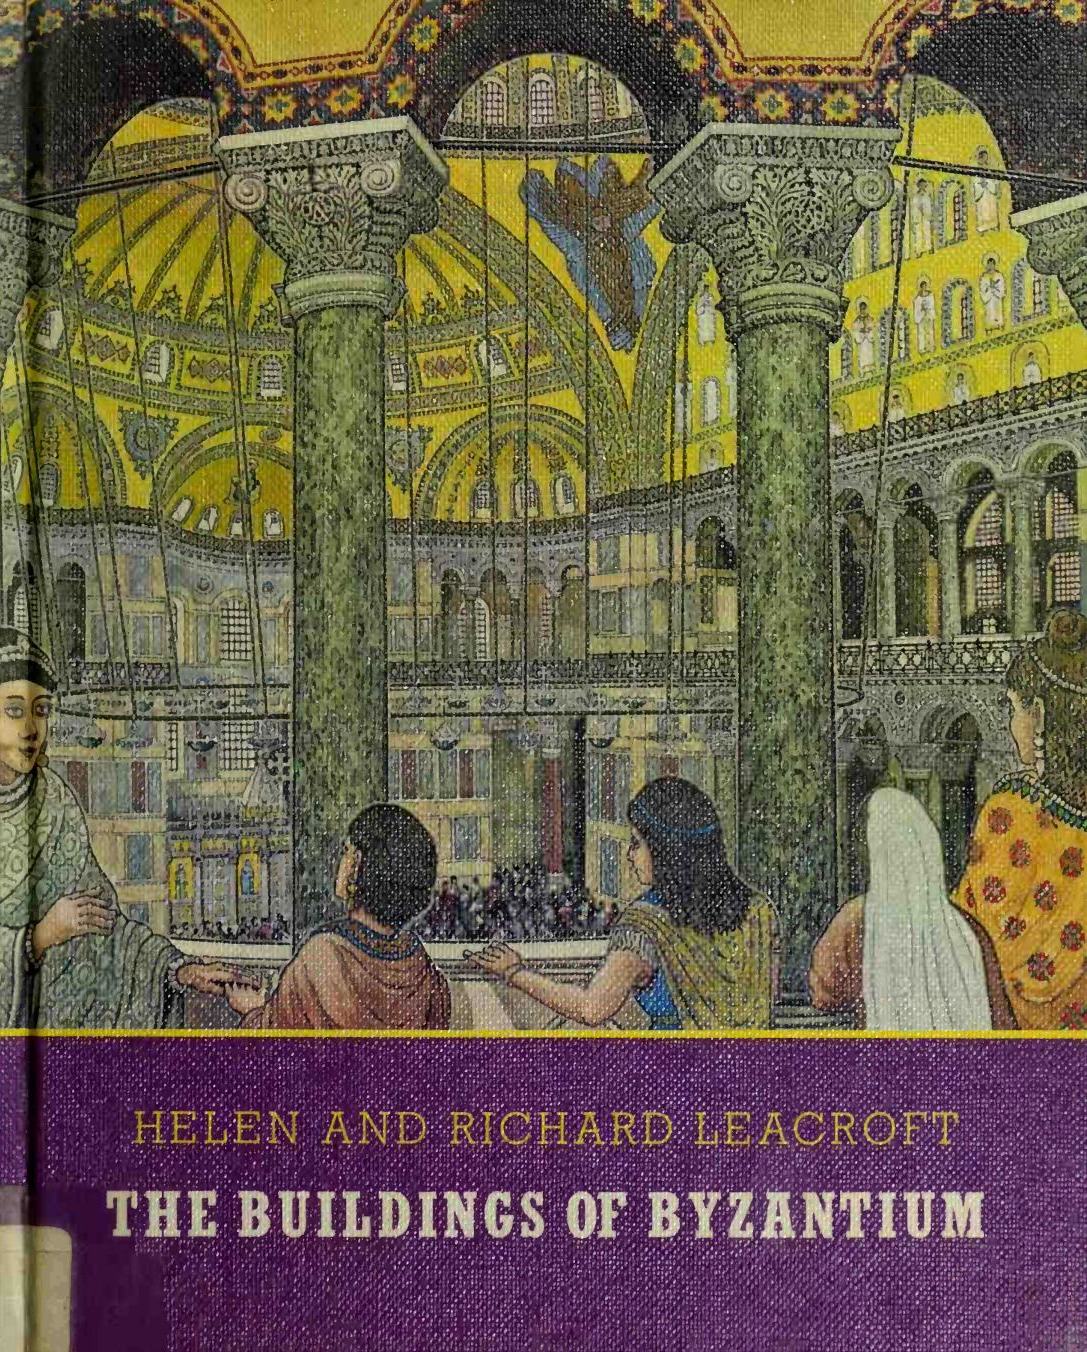 The Buildings of Byzantium / Helen and Richard Leacroft